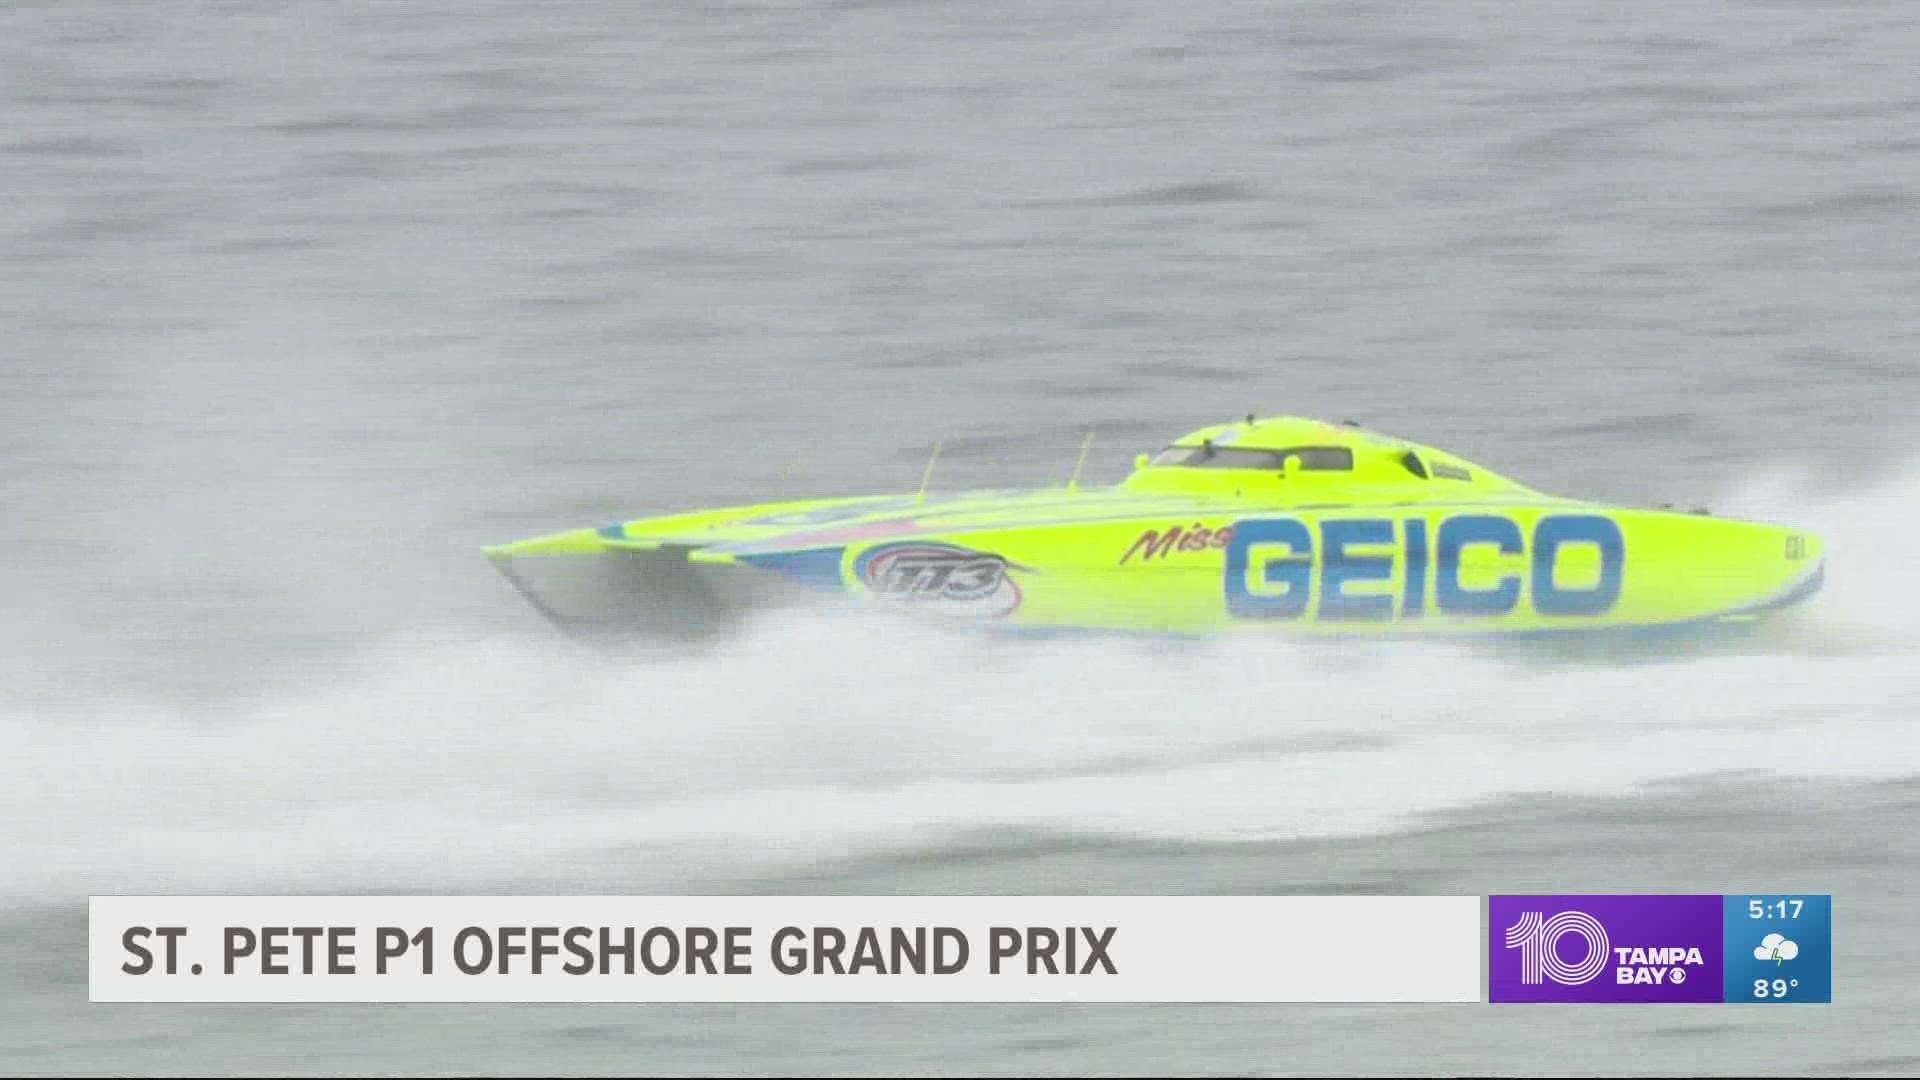 P1 Offshore St. Pete Grand Prix set for Labor Day weekend